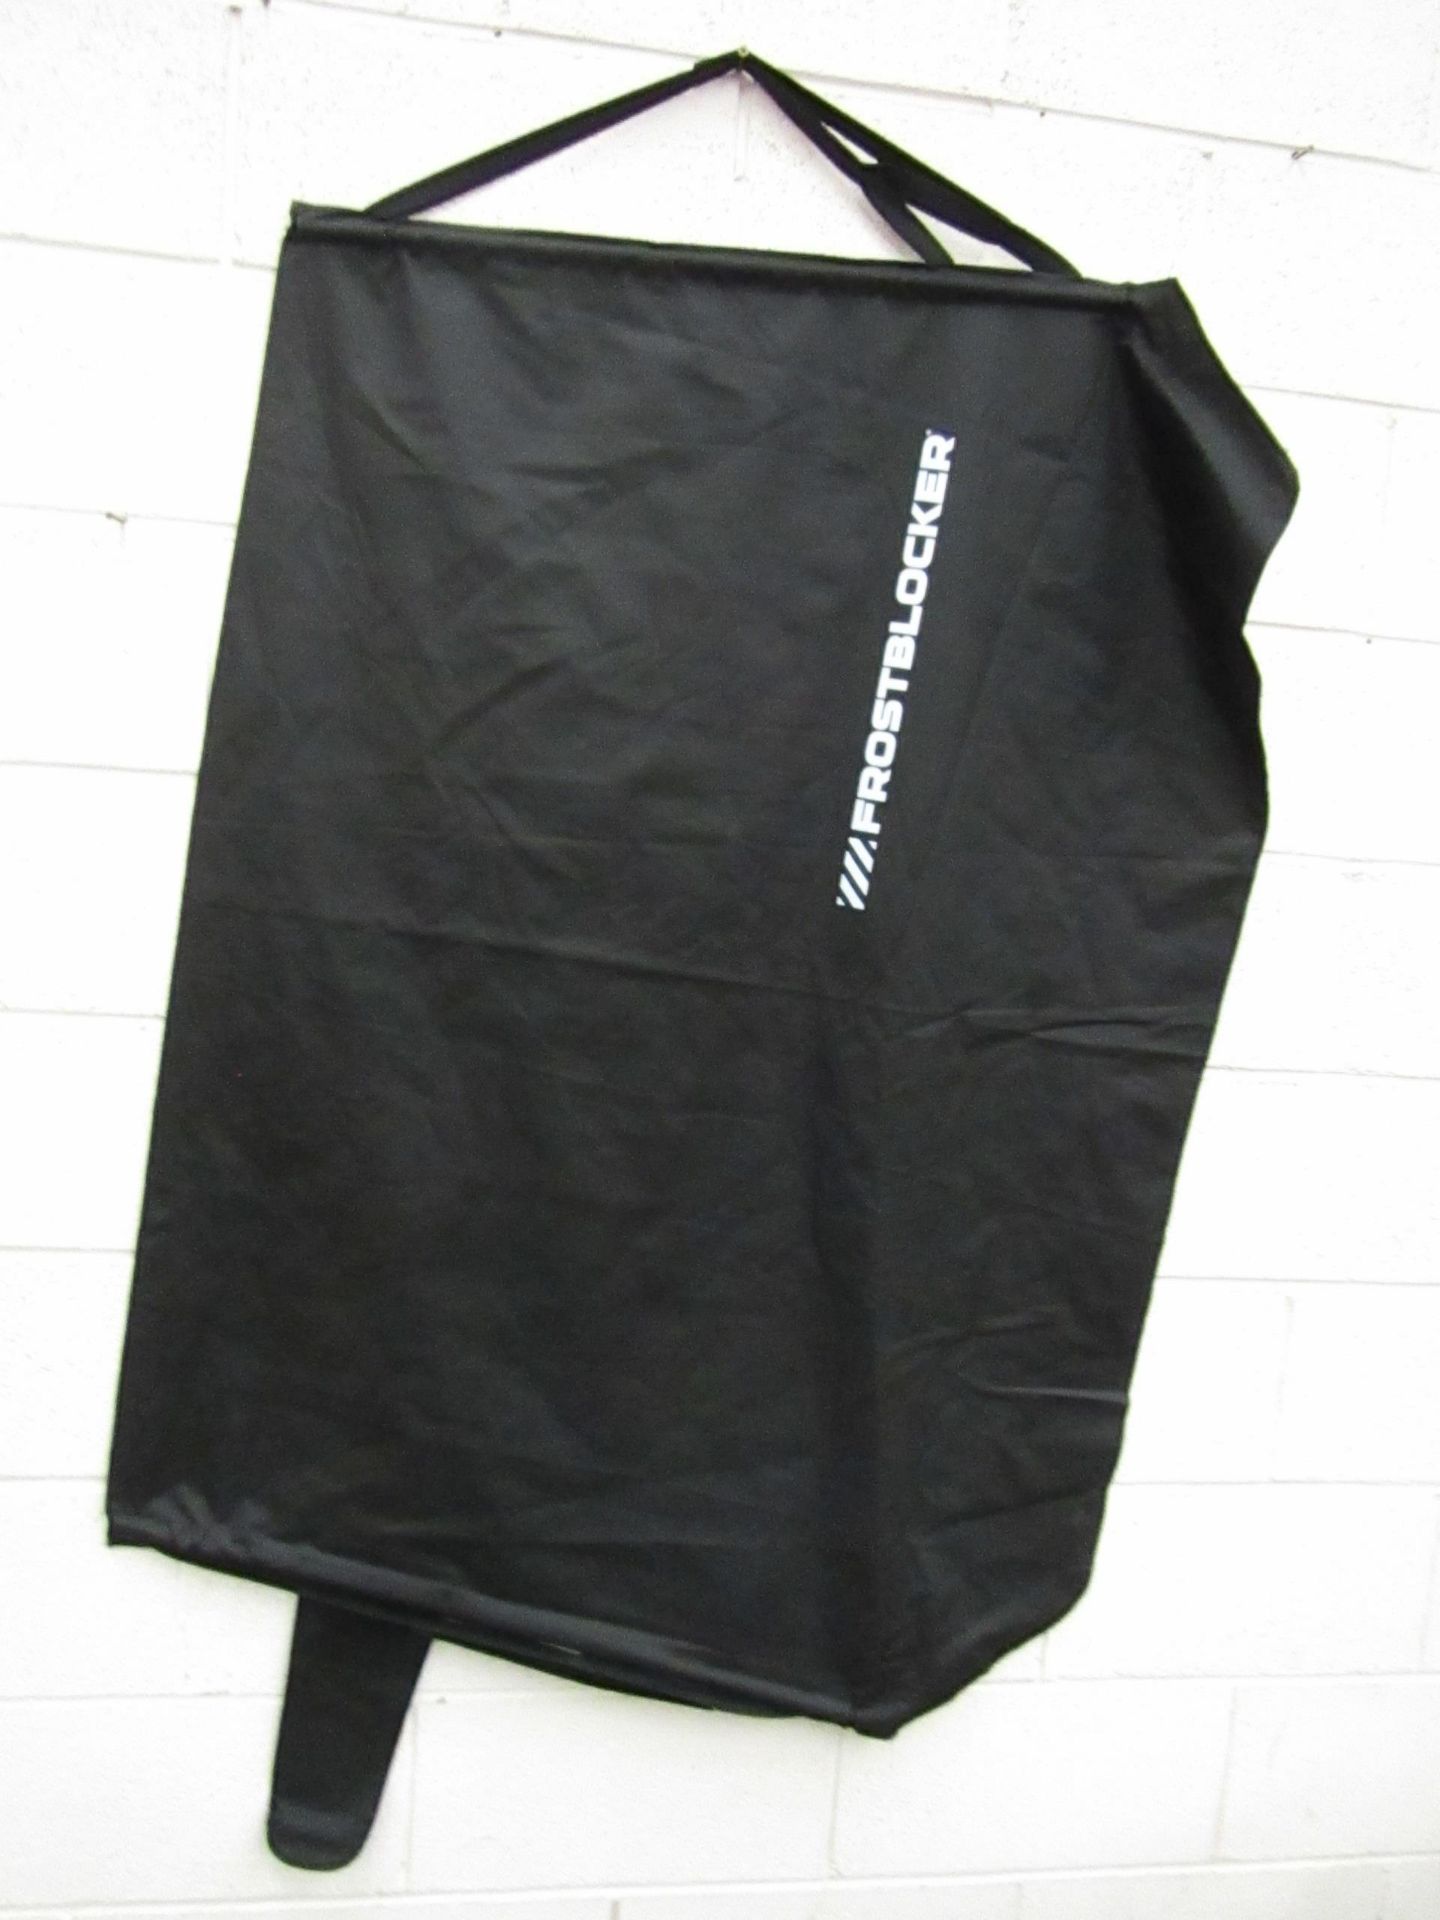 Frostblocker - Wind-Screen Ice/Snow Protector ( 150x104cm ) - All Good Condition.